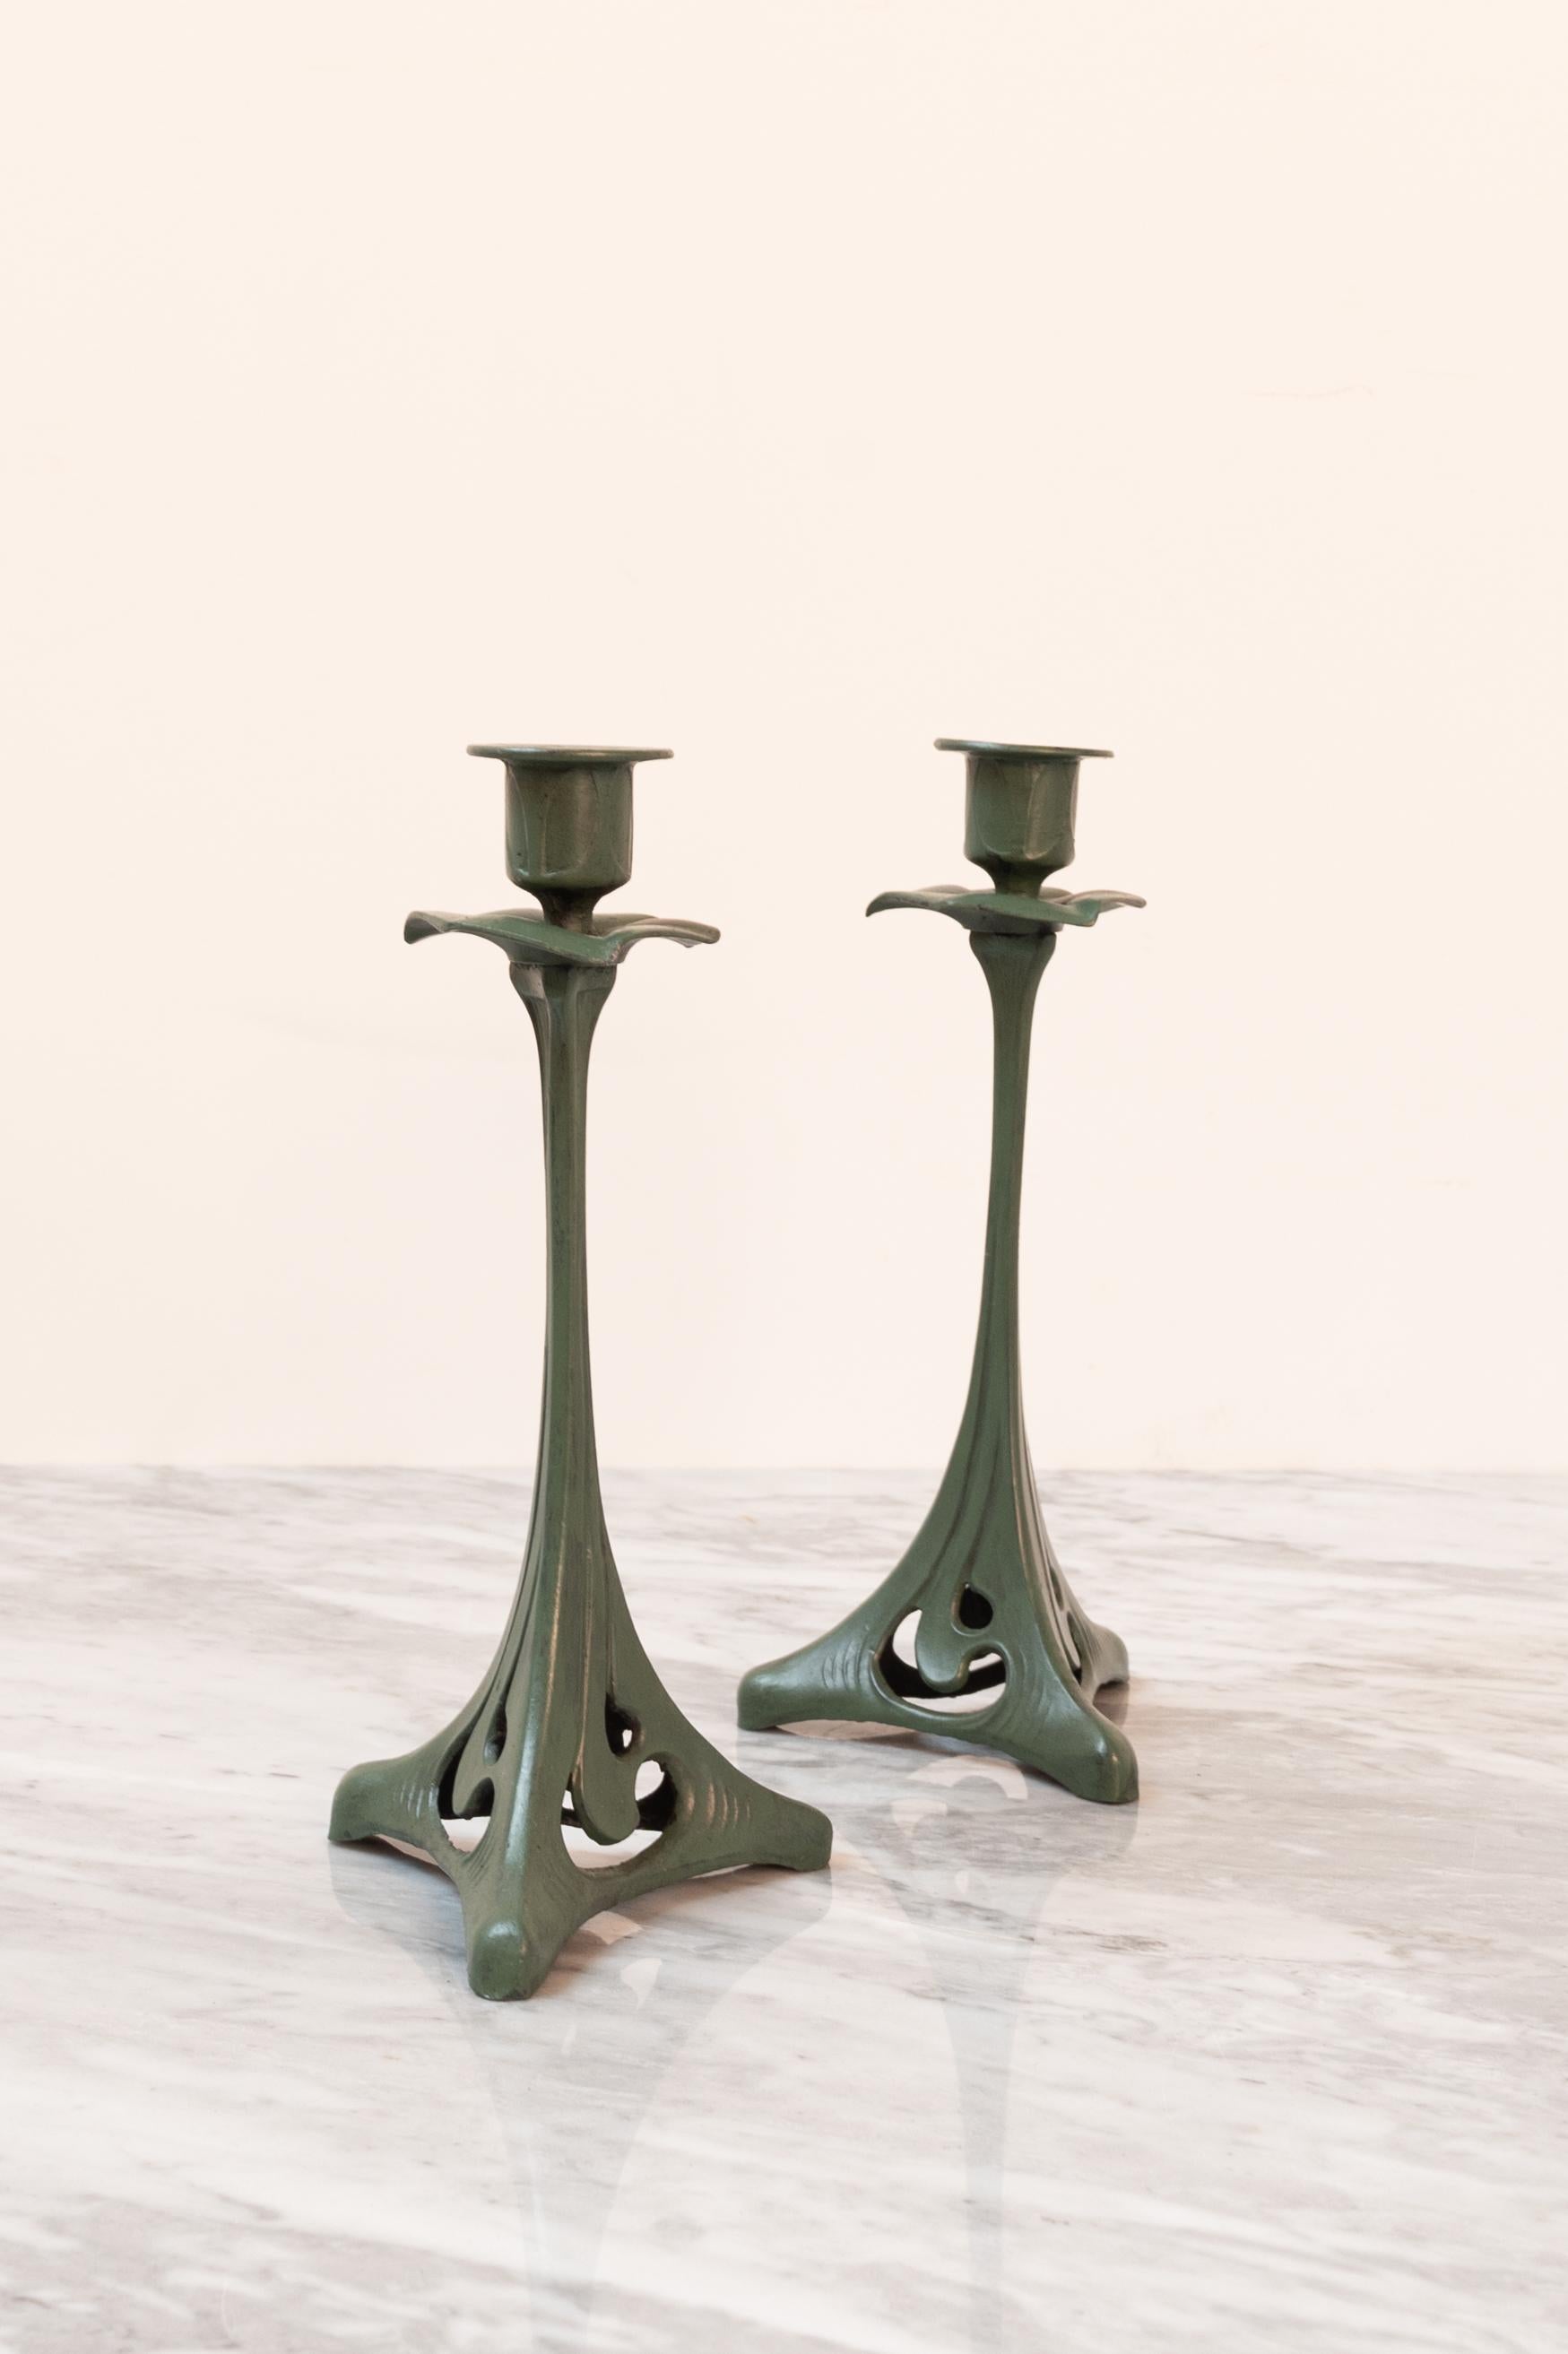 Presumably in bronze. The candle holders have a great green patina.

H 20,5 cm x 9,5 cm (foot)